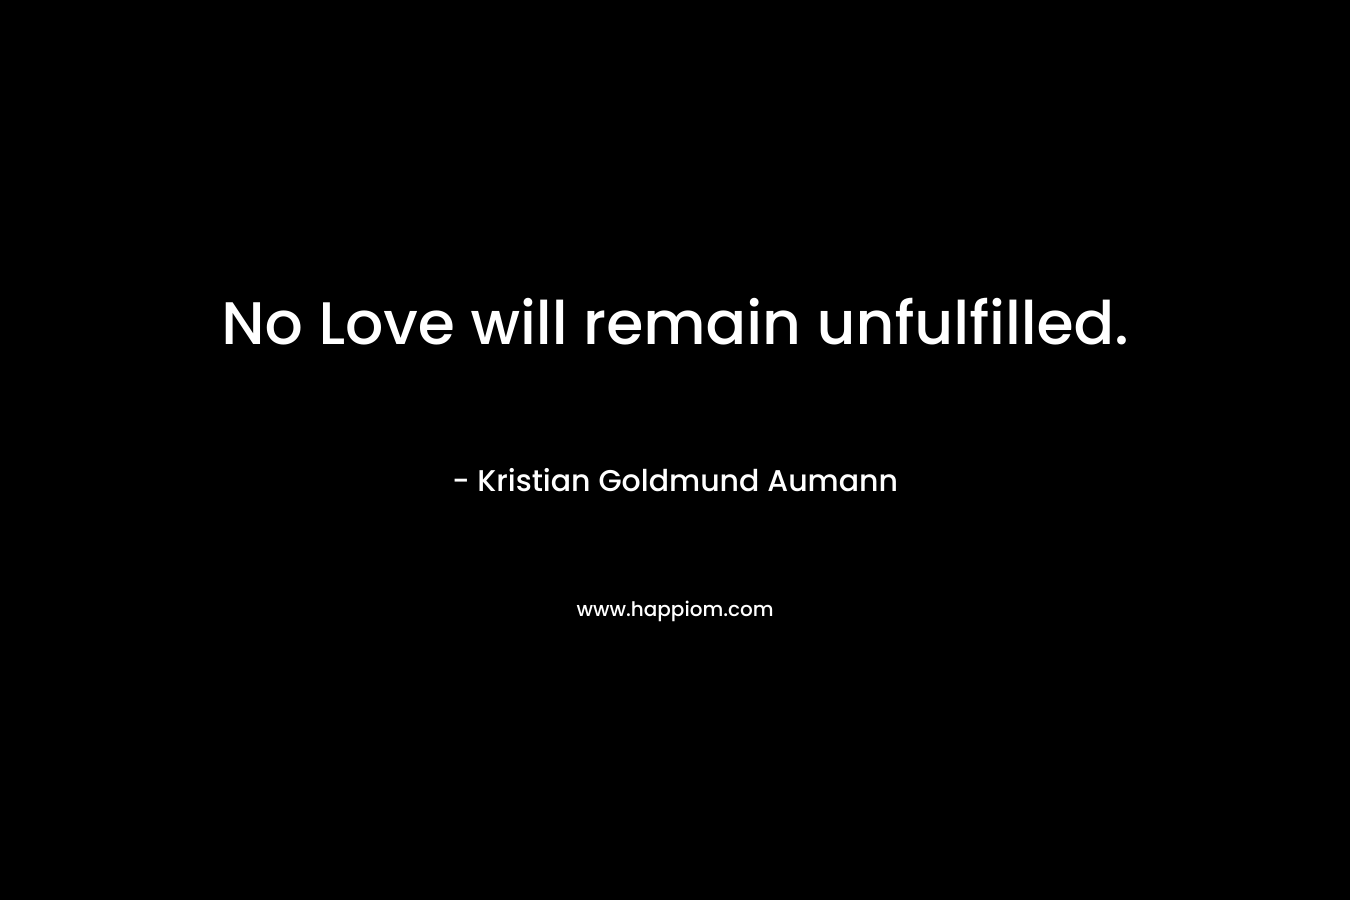 No Love will remain unfulfilled.